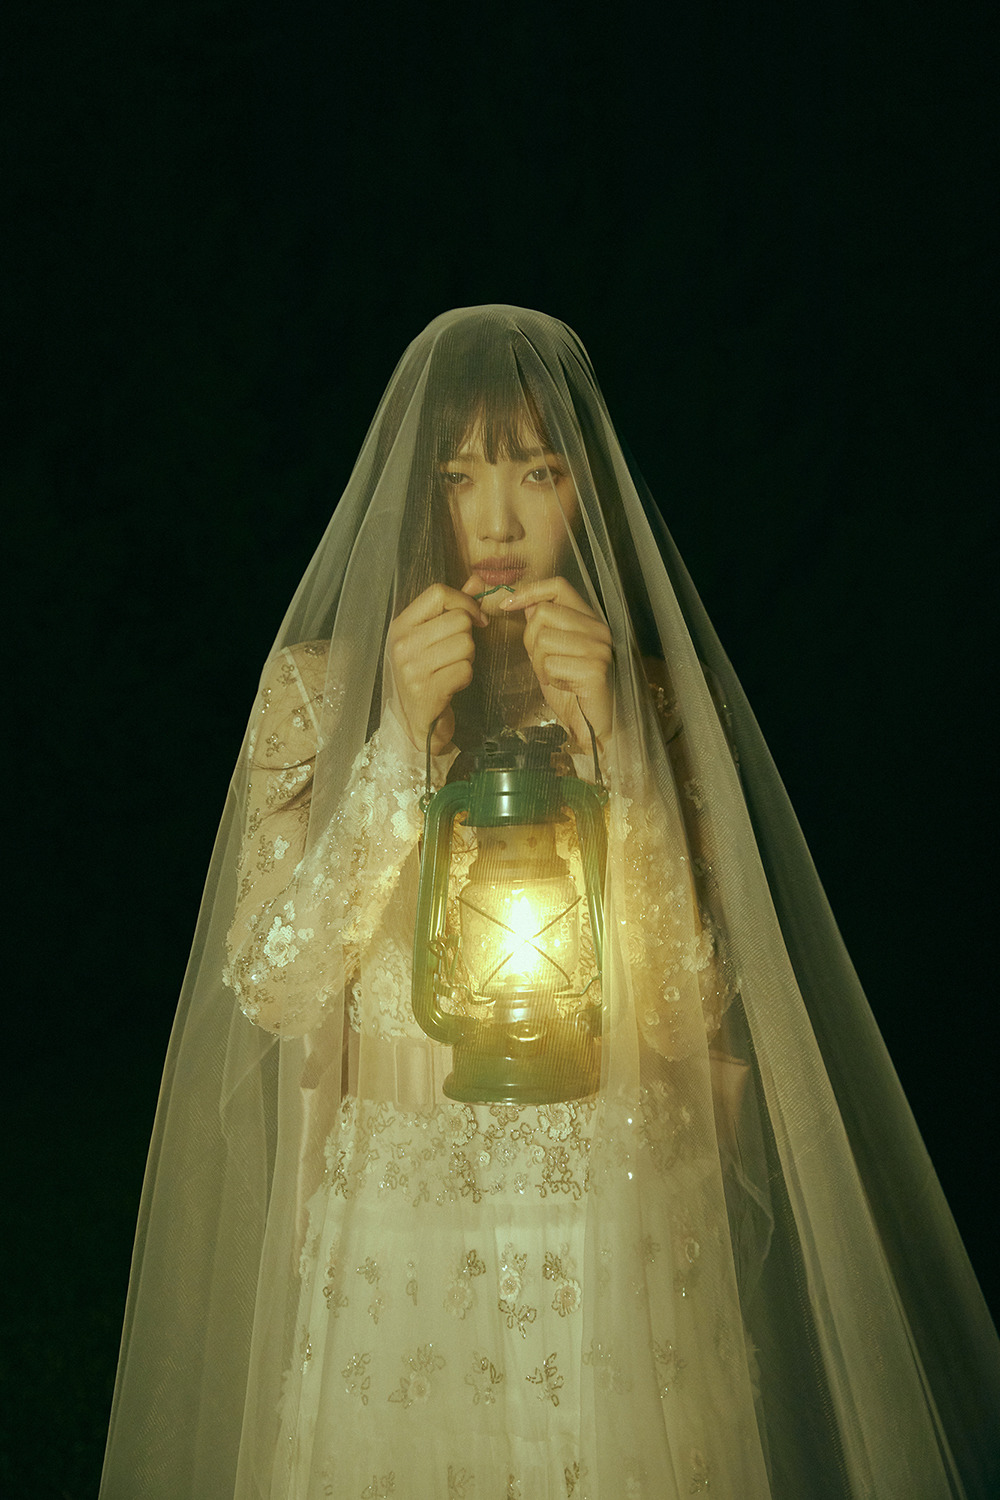 Red Velvet has released its new album Teaser Image sequentially through its official SNS account since the 16th, and finally opened Joes Teaser Image with a fantastic atmosphere and unique visuals.Red Velvets repackaged album The Reve Festival finale will be released on various music sites at 6 pm on the 23rd.The title song is Psycho, featuring a shifting melody line and addictive hooks, with hit makers Yoo Young-jin and Kenzie participating.In addition, the new song In & Out (In & Out) added to this album is by famous production teams Moonshine and Kenzie, Remember Forever is by popular lyricist Isran and rising production team Royal Dive, and special track La Rouge (La Ruse). Rouge has been further enhanced in perfection by various musicians from home and abroad, including the participation of world-renowned composer Andreas Oberg.Meanwhile, Red Velvets mini-photo book Red Velvet Selfie Book # 3 (SELFIE BOOK: RED VELVET #3), which contains photos taken directly during his trip to Switzerland, will be released on January 10, 2020 and will be available from the 20th.